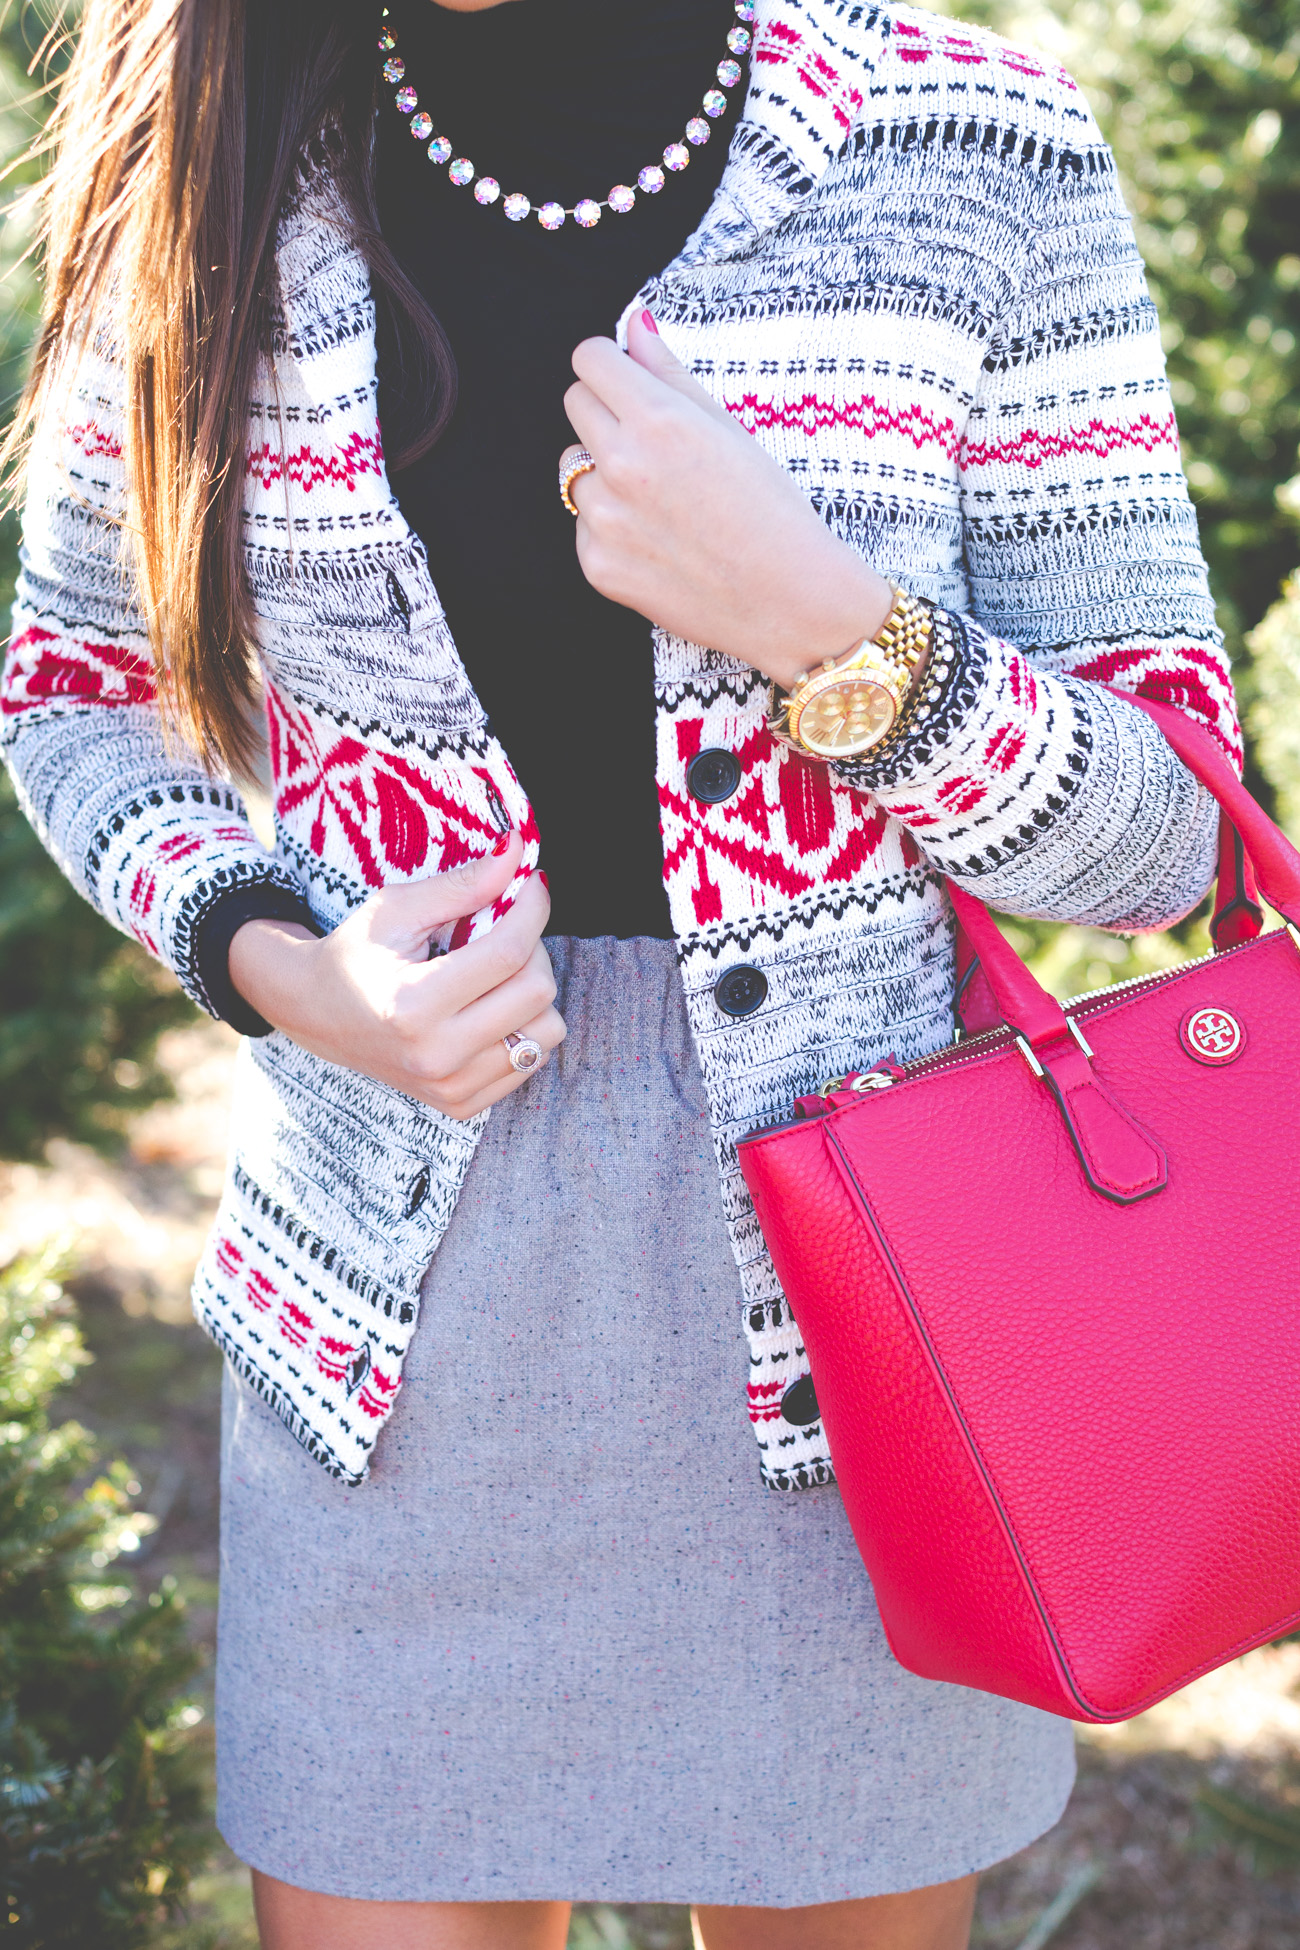 fair isle cardigan, fair isle sweater, gray skirt, red hunter boots, hunter tour packable boots,  christmas tree farm, red tory burch tote, loren hope kaylee necklace // grace wainwright from a southern drawl